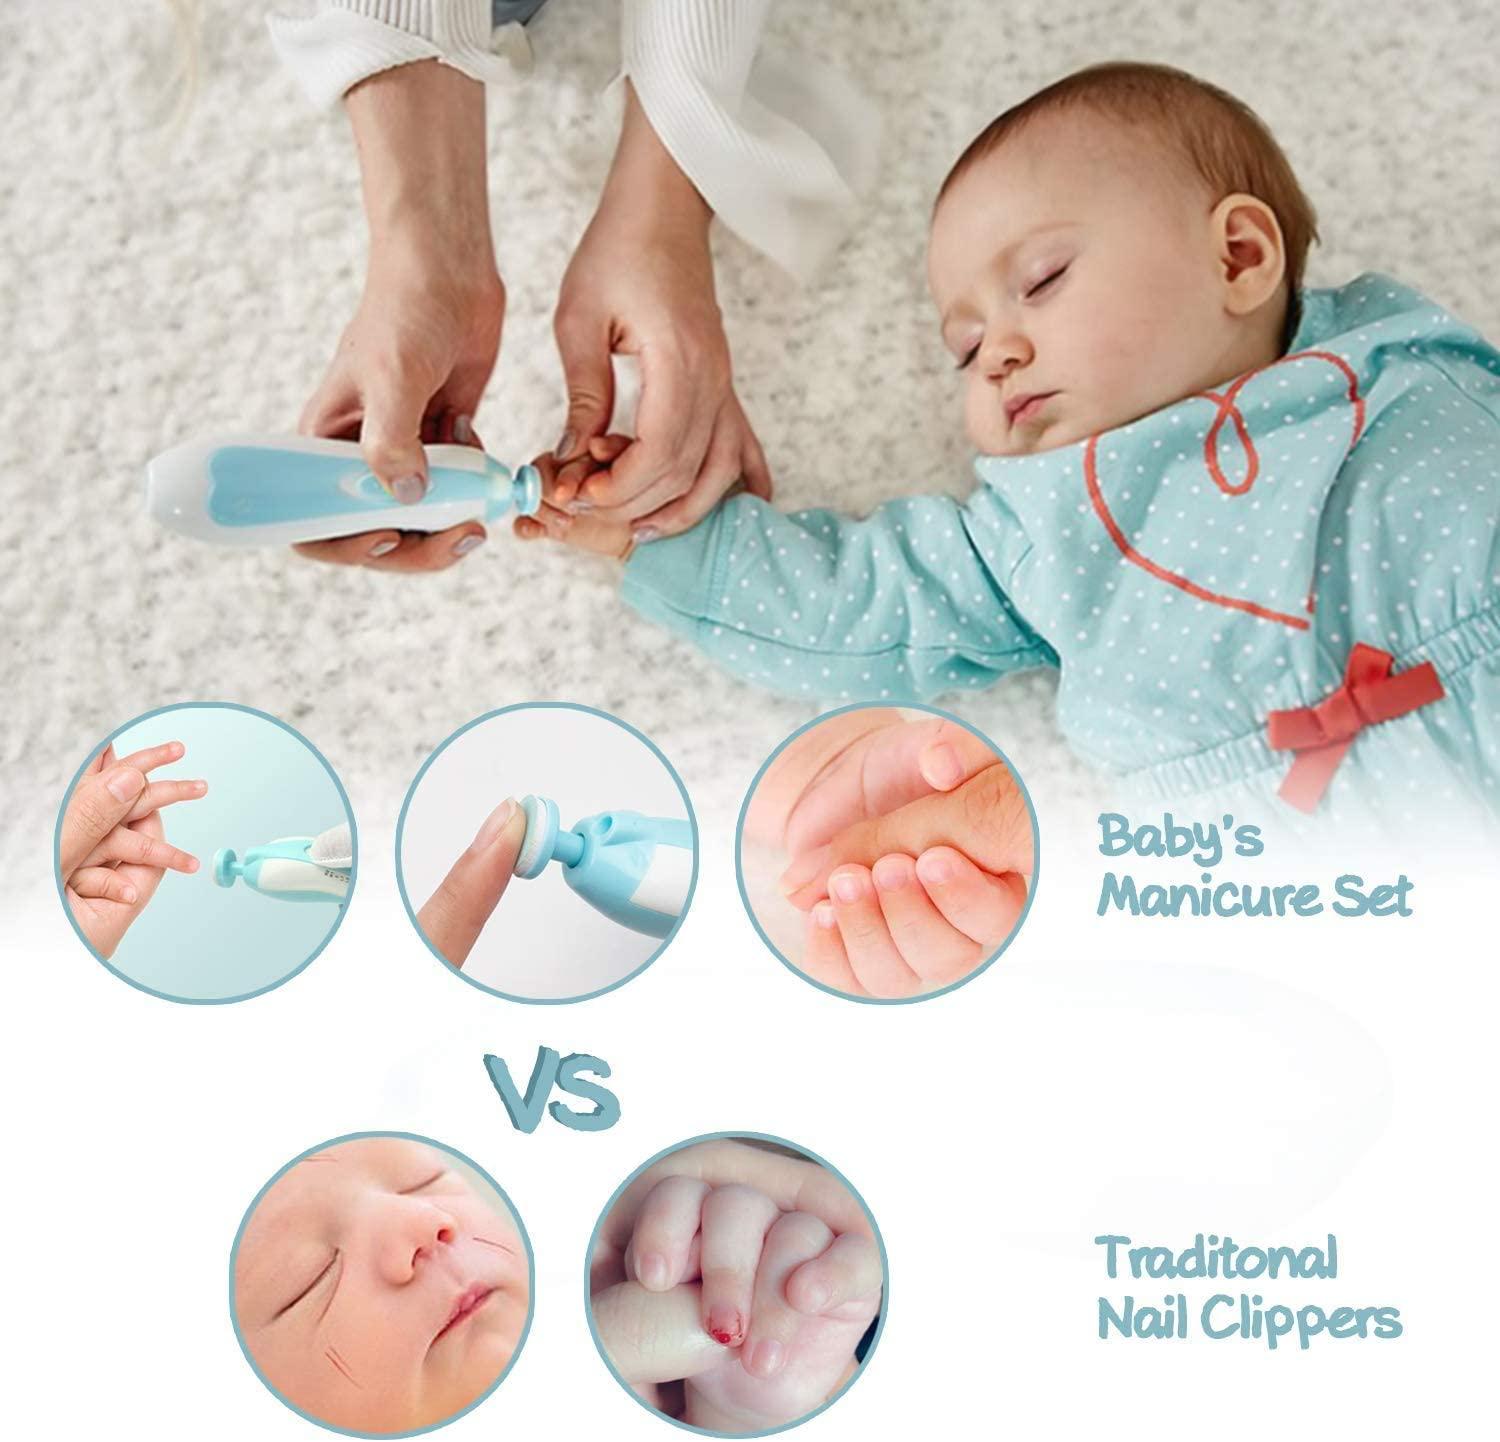 Dropship Electric Nail Trimmer For Newborn Baby Portable Newborn Nail Care Set  Infant Kids Manicure Set Manicure Quiet Nail Trimmer to Sell Online at a  Lower Price | Doba